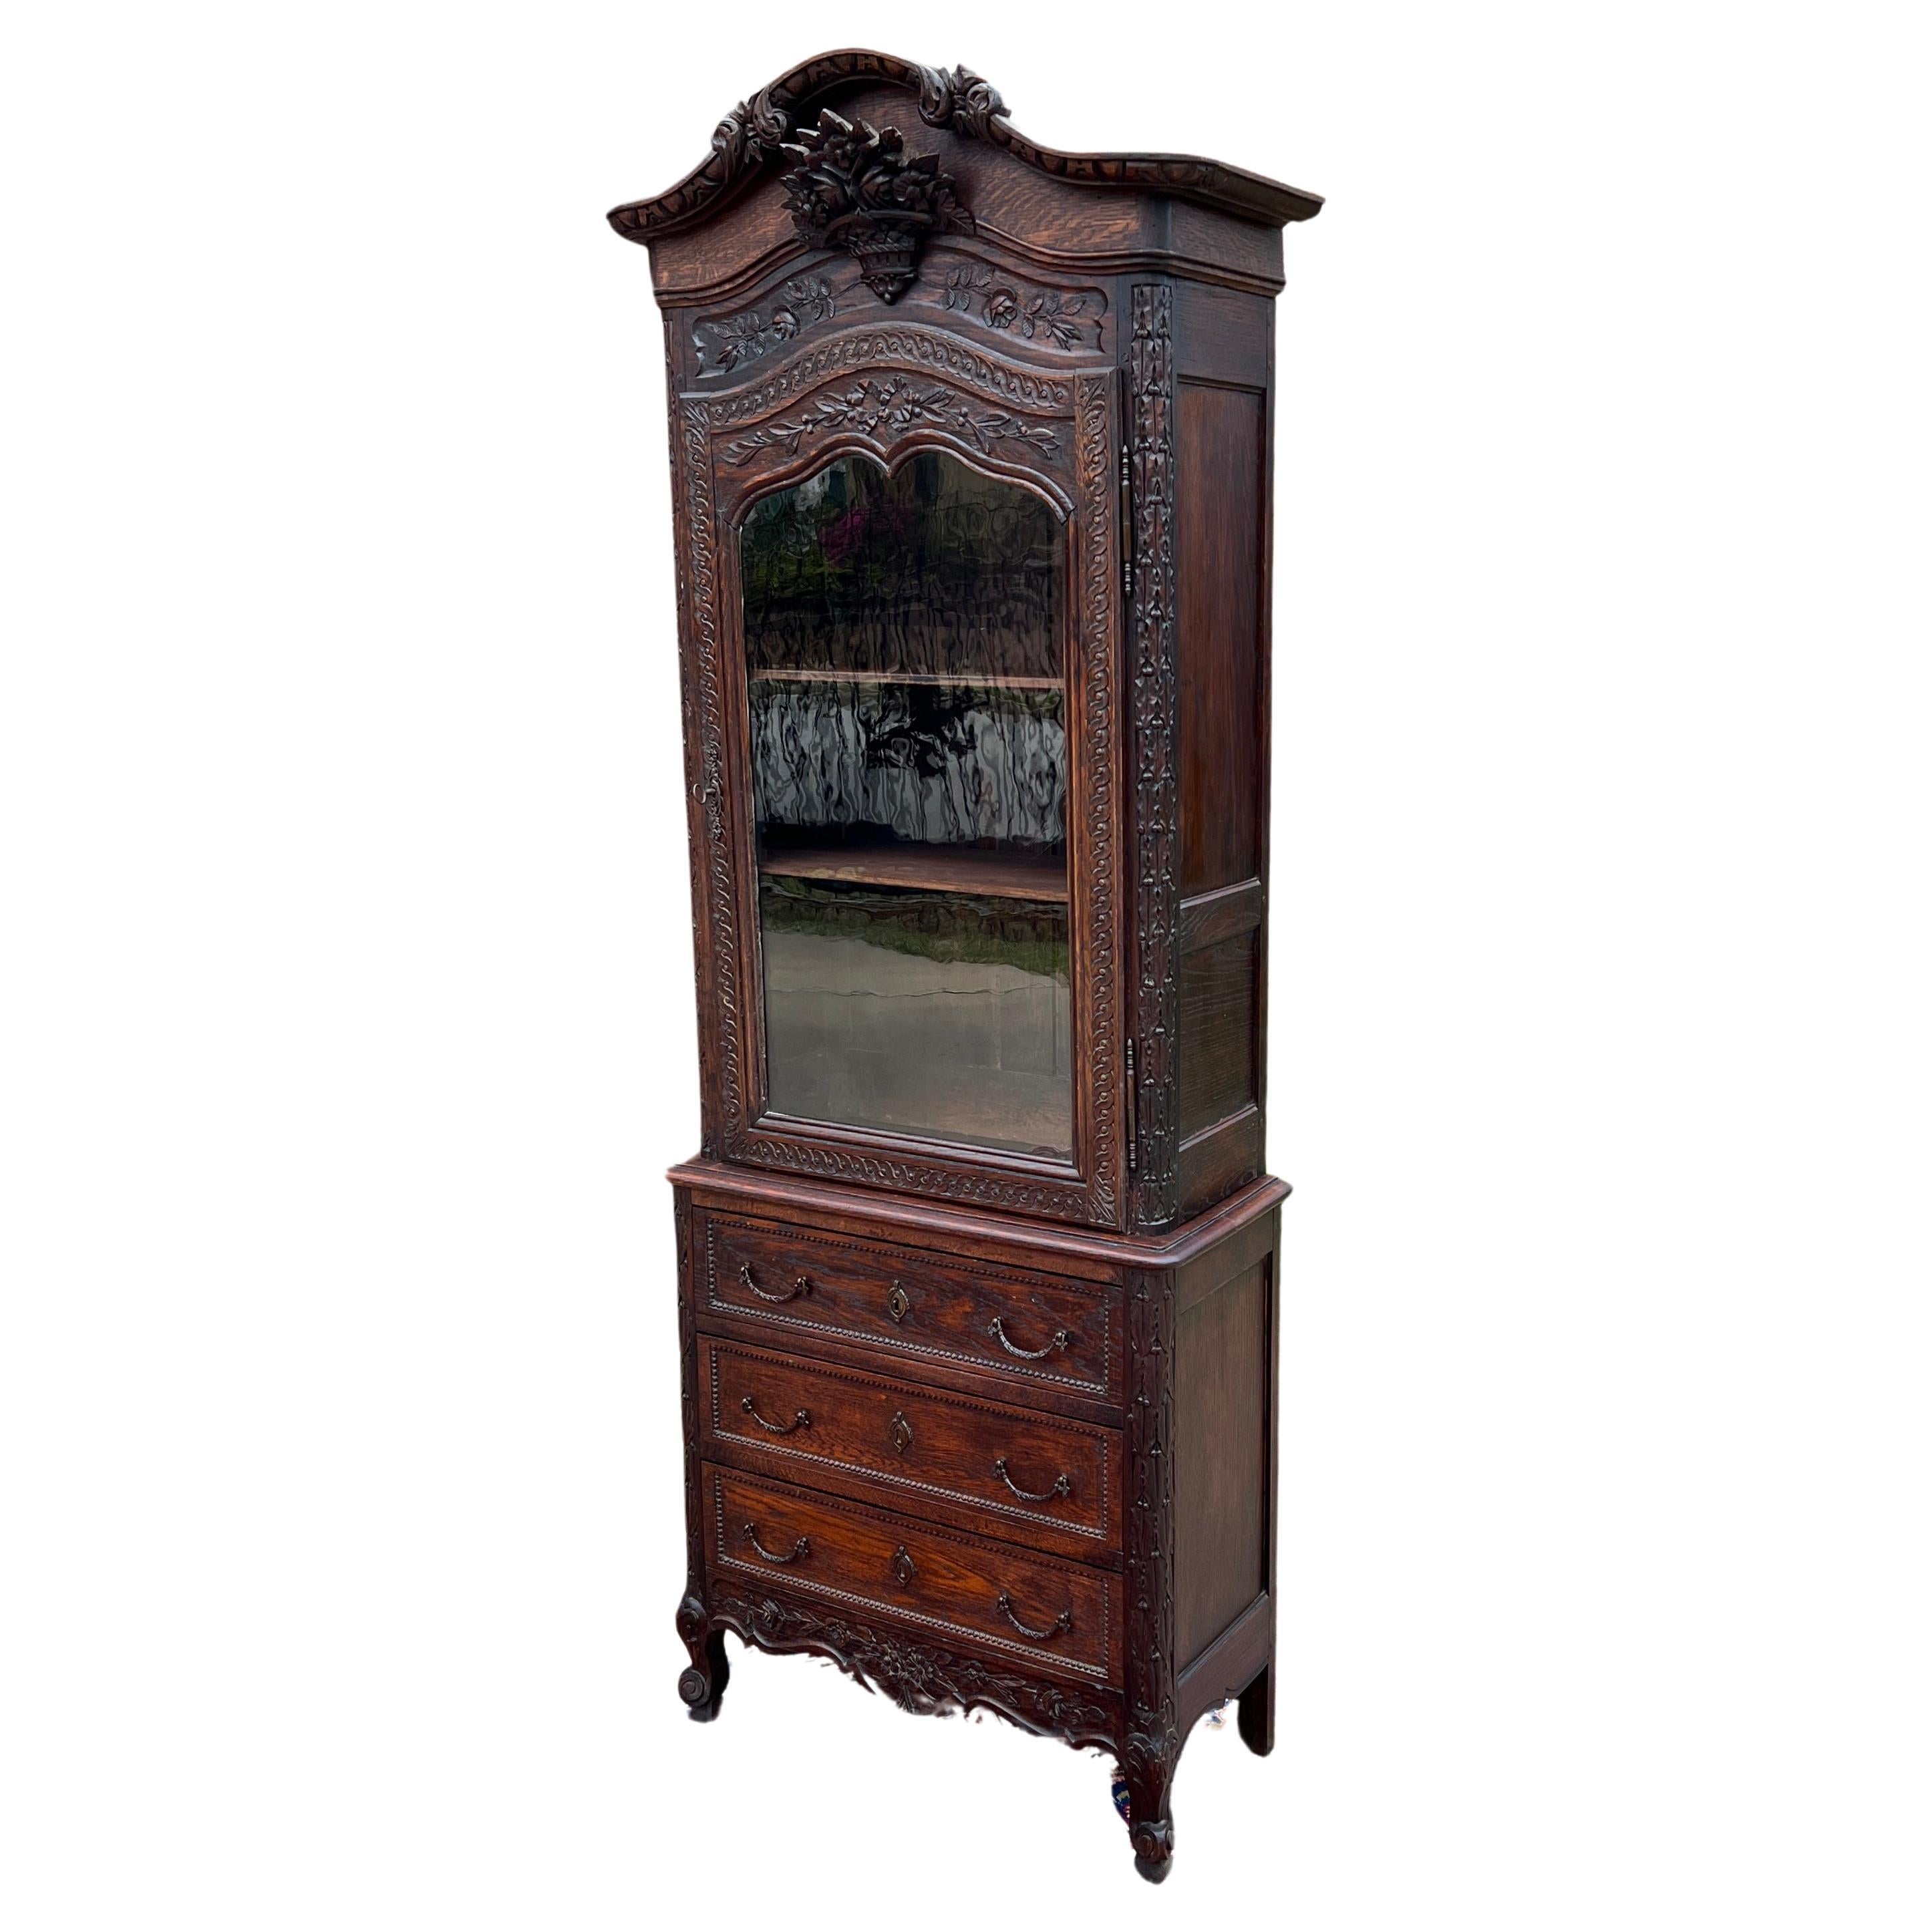 Antique French Bonnetierre Vitrine Bookcase Over Chest of Drawers Oak 19th C. For Sale